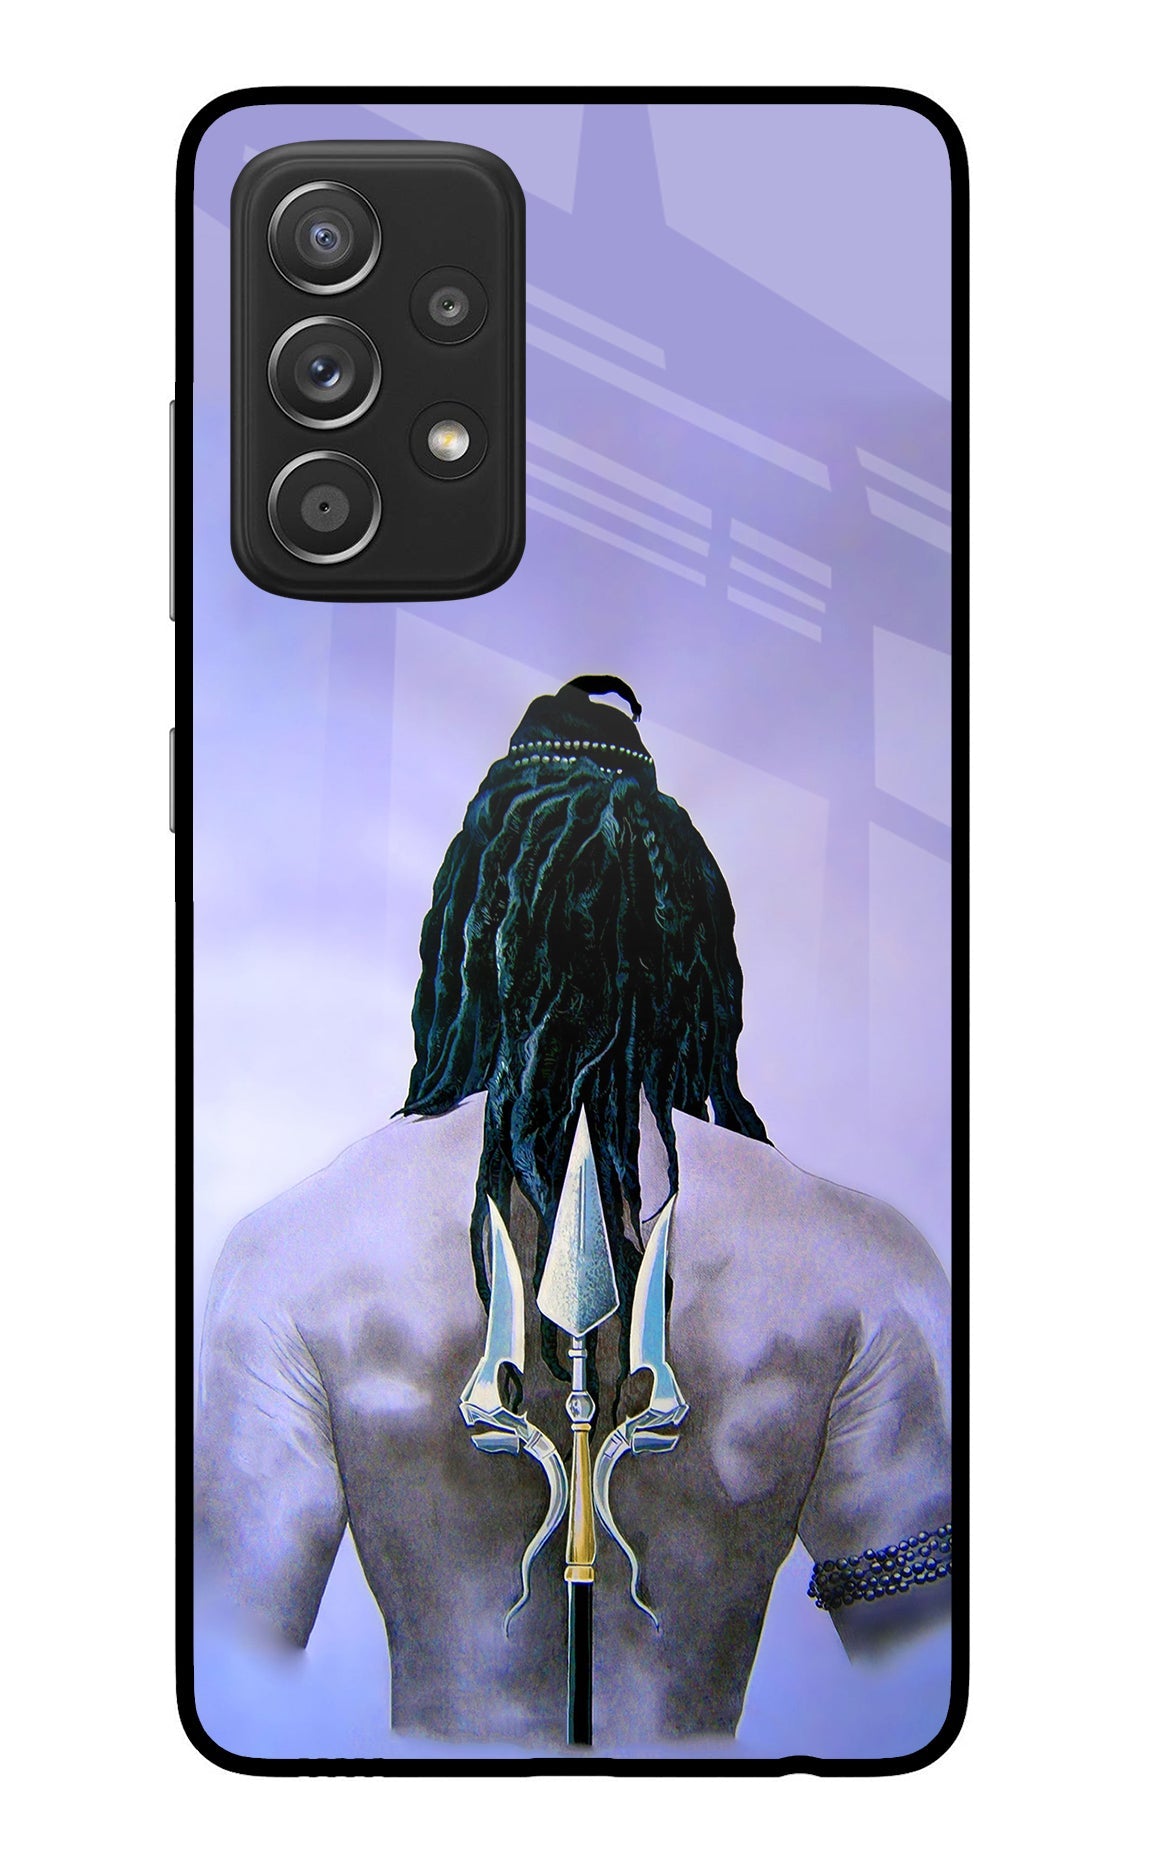 Shiva Samsung A52/A52s 5G Back Cover